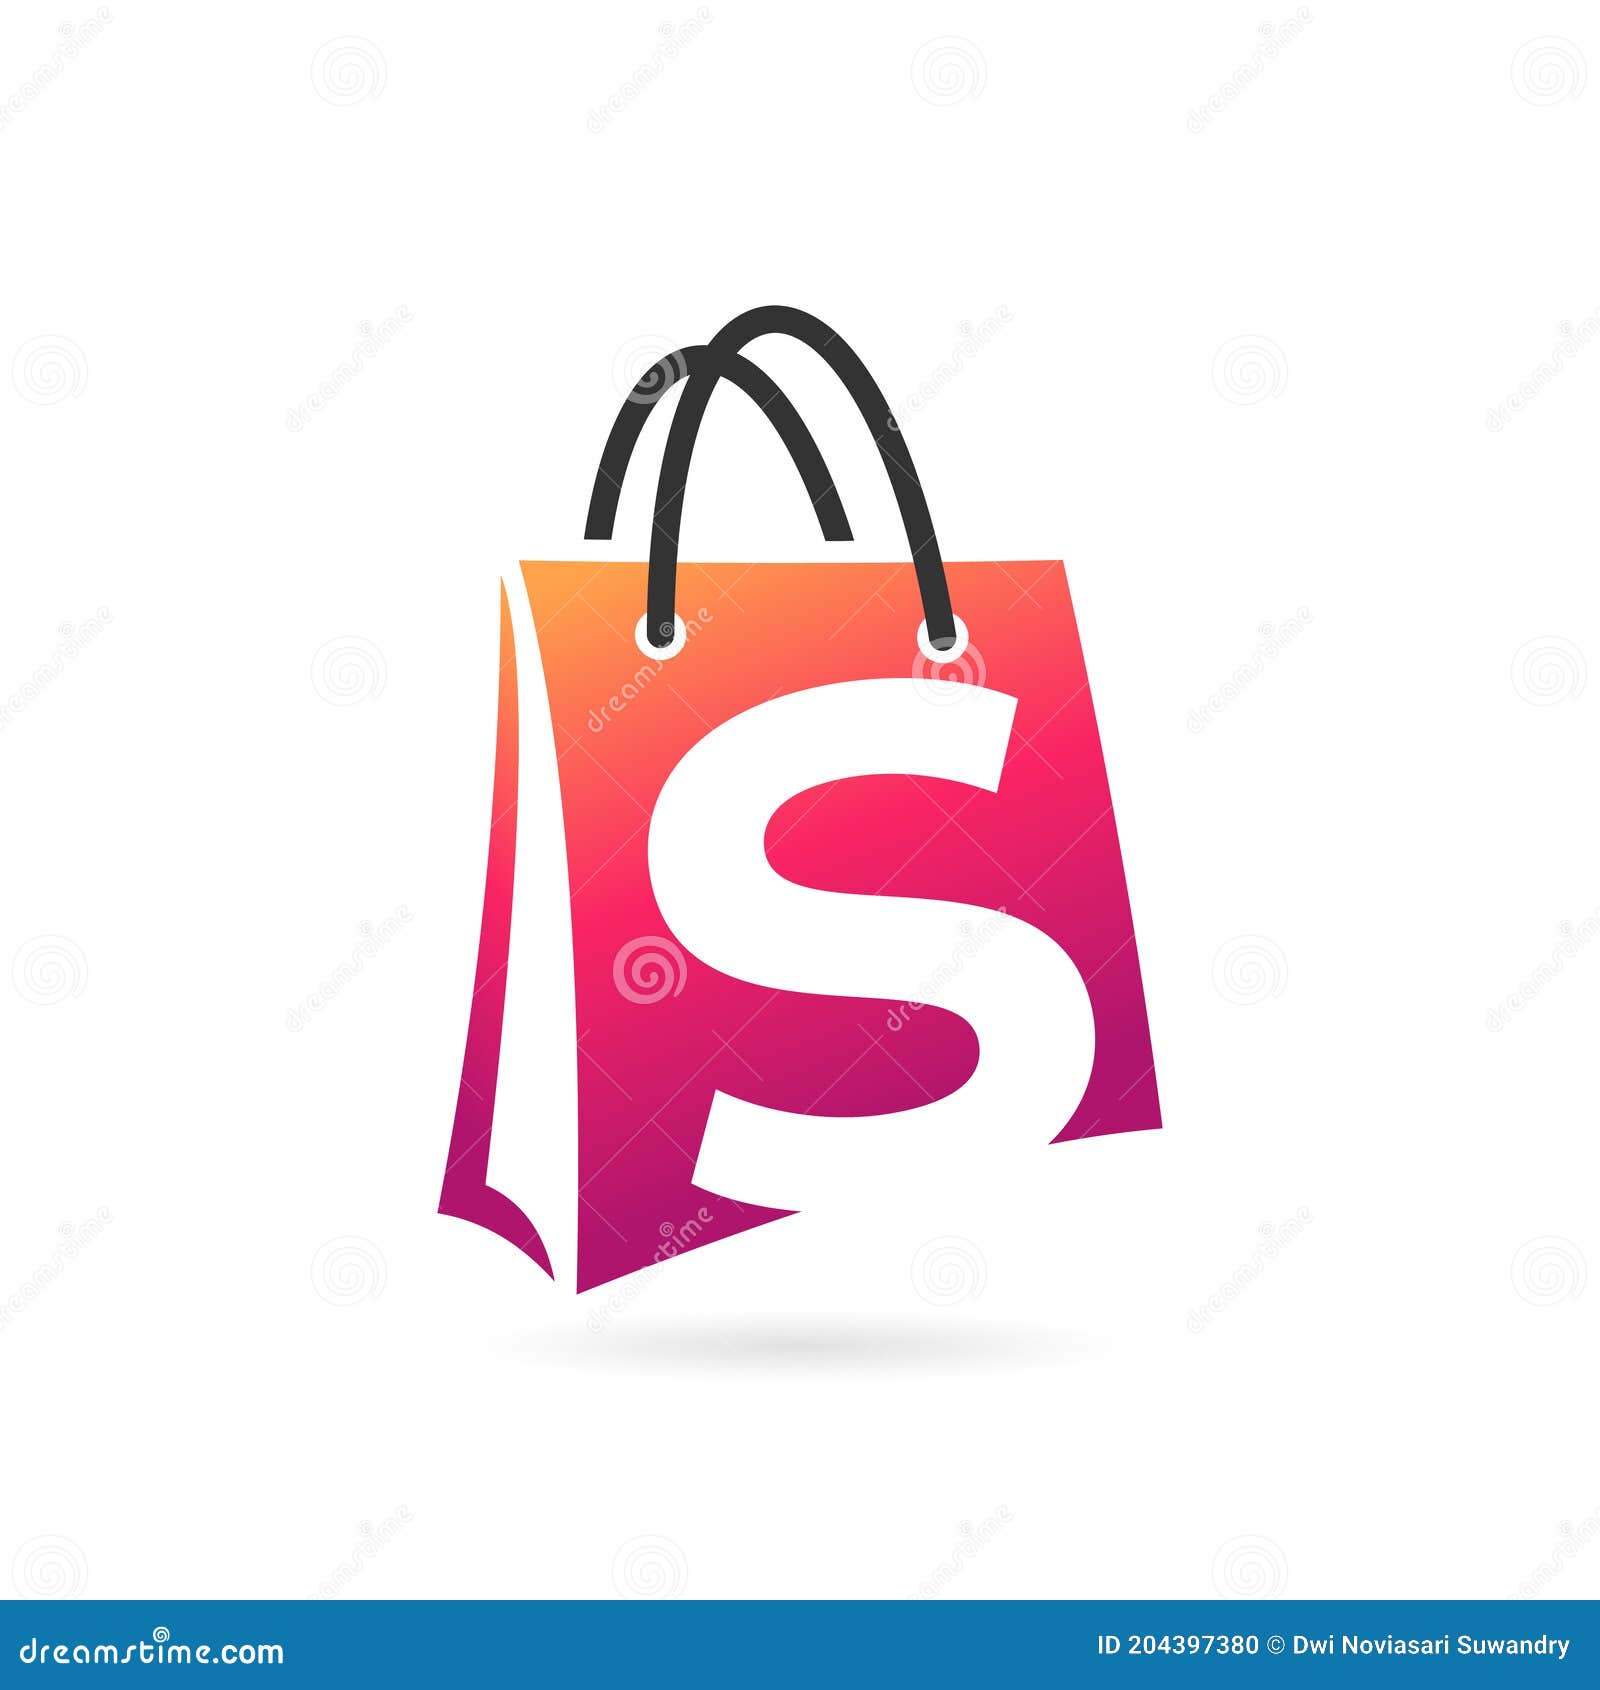 Shopping bag logo incorporated with v letter Vector Image